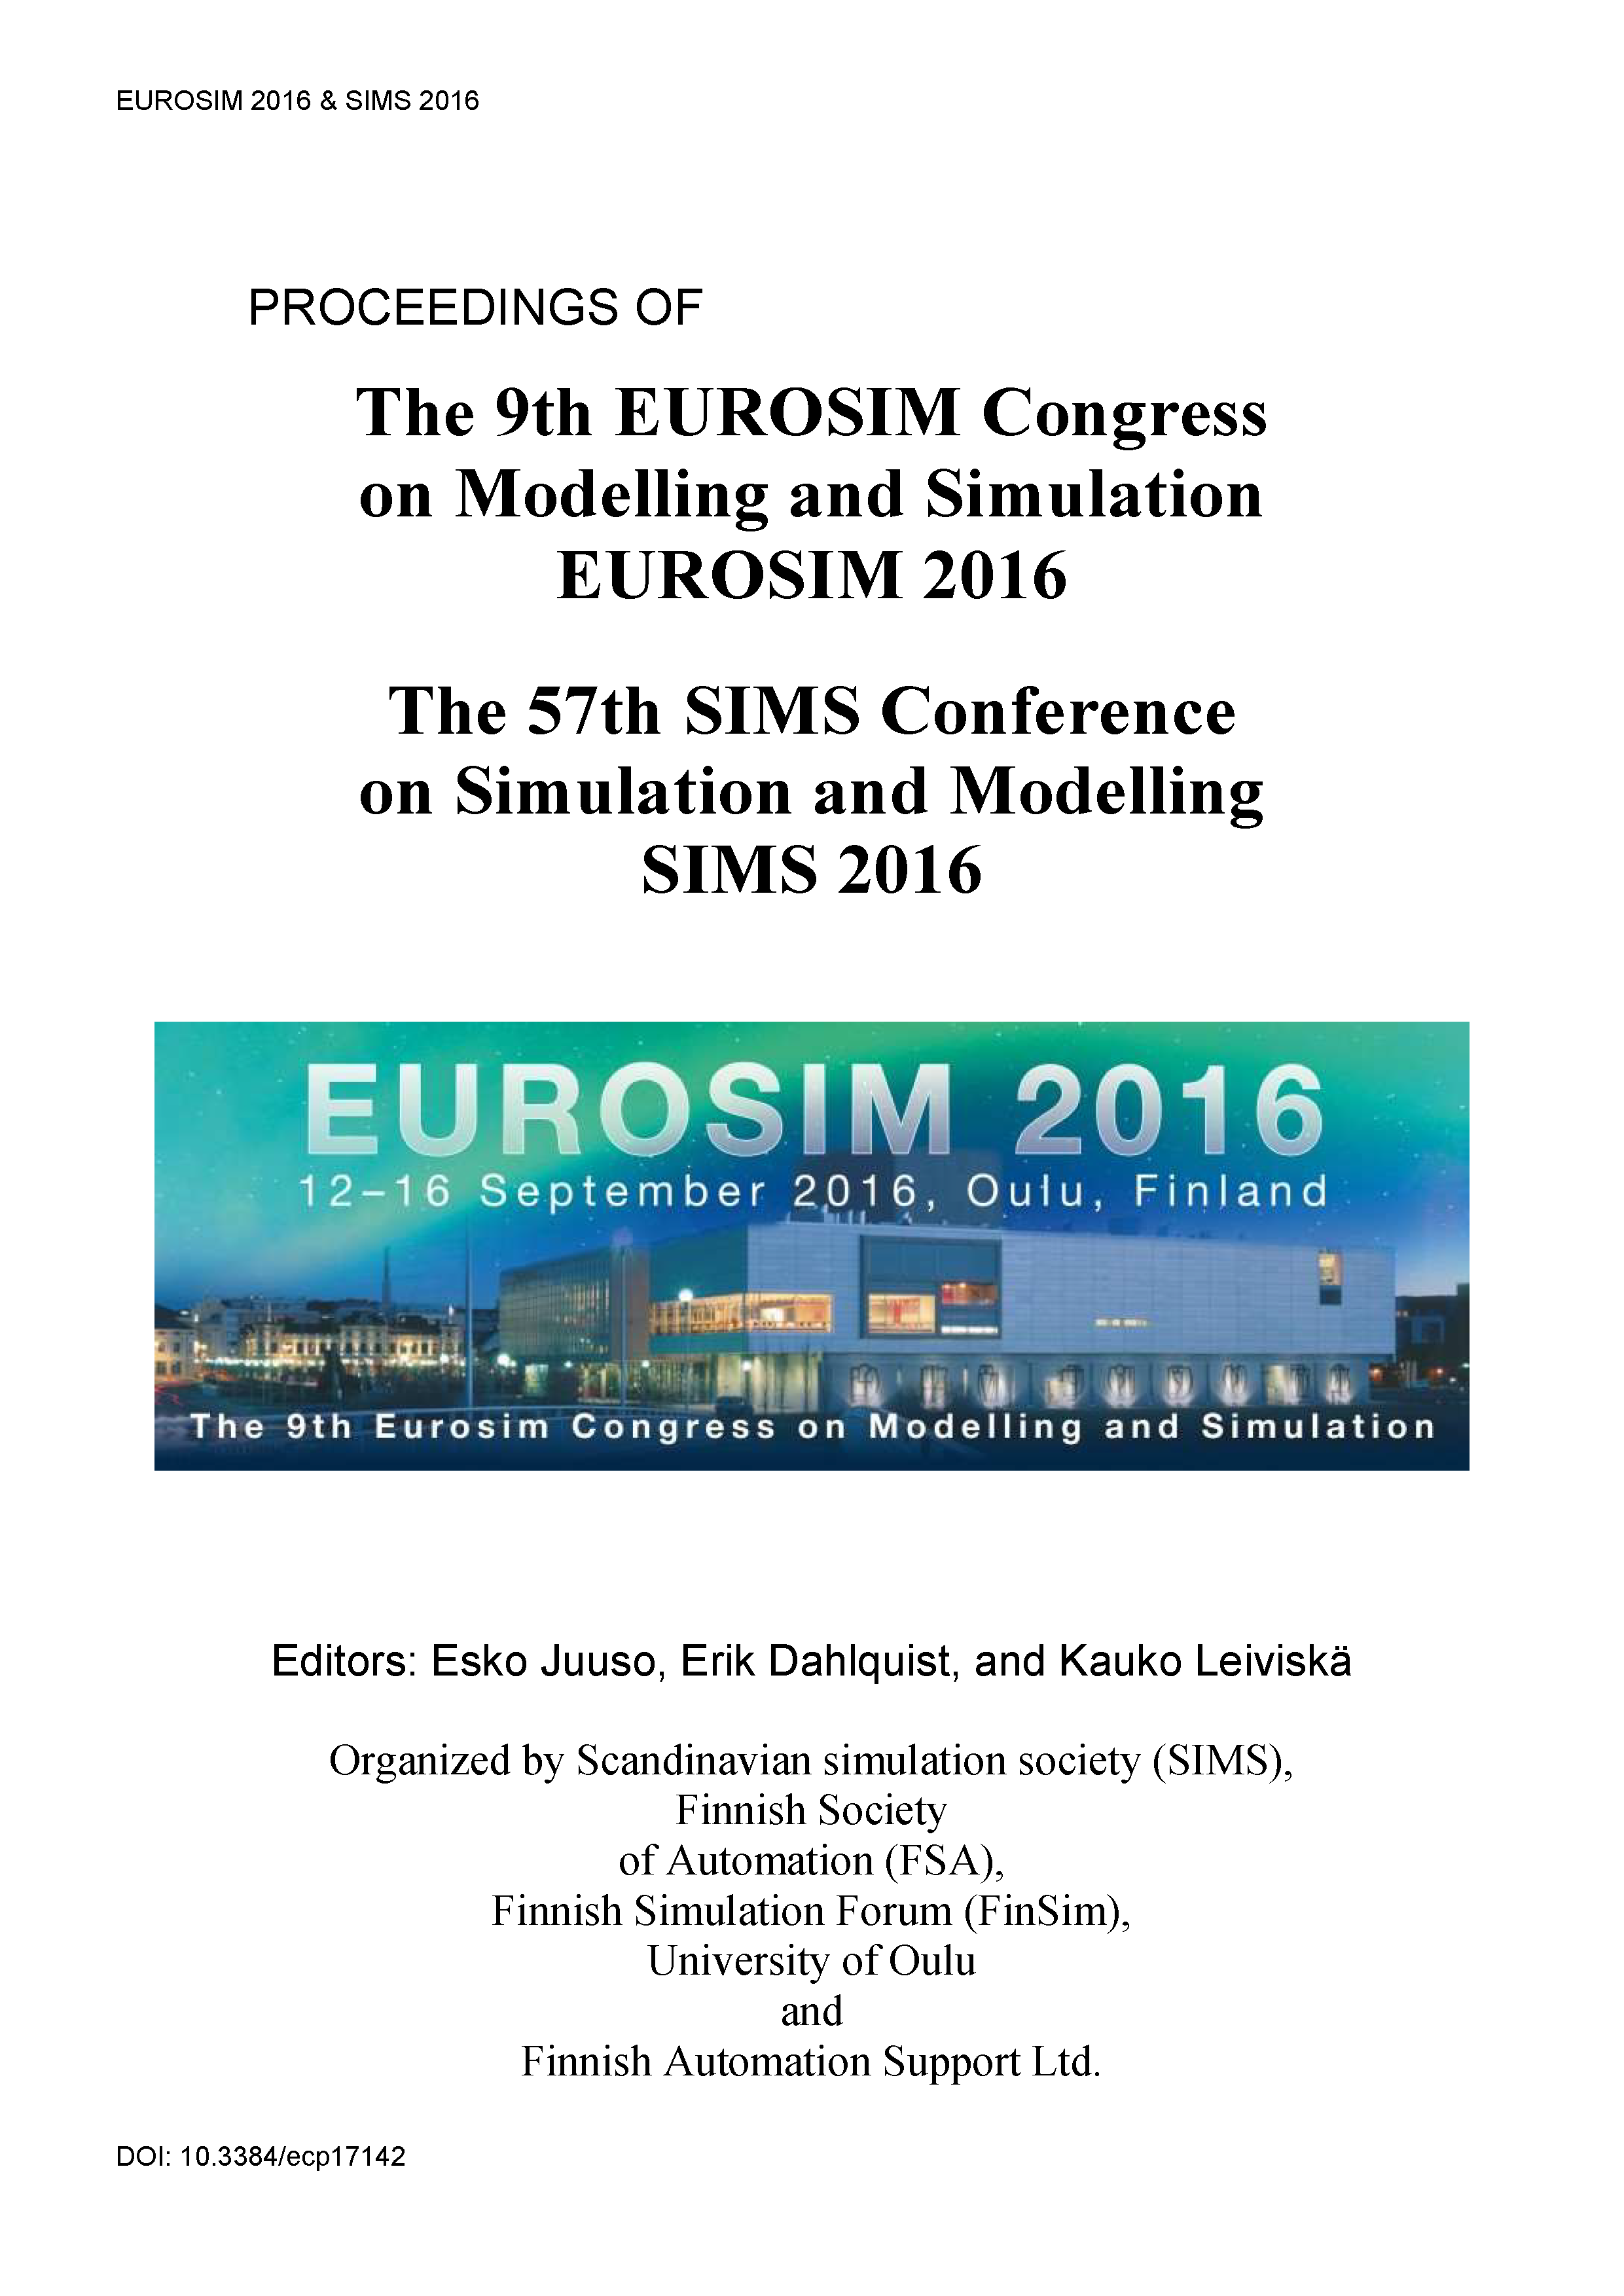 					View Proceedings of The 9th EUROSIM Congress on Modelling and Simulation, EUROSIM 2016, The 57th SIMS Conference on Simulation and Modelling SIMS 2016
				